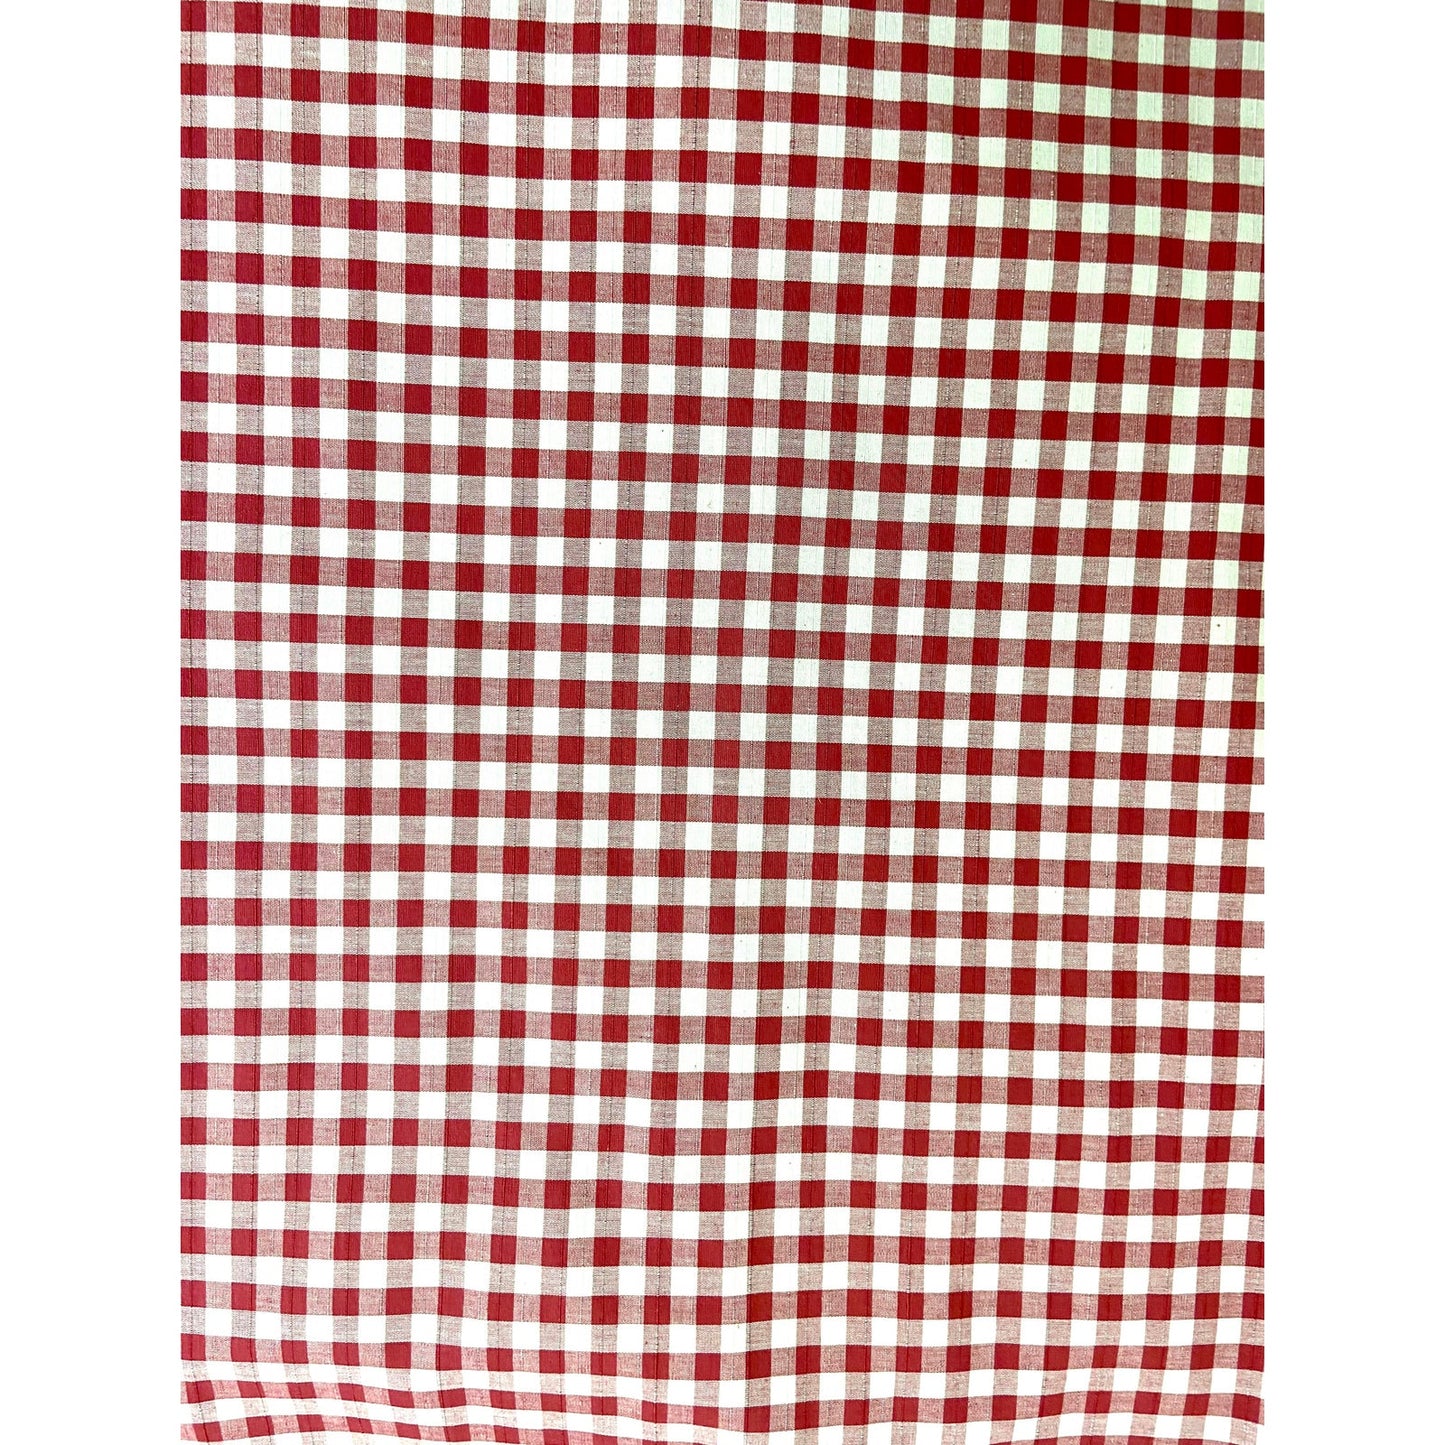 Red Checked Upholstery Fabric Remnants - 2 Pieces